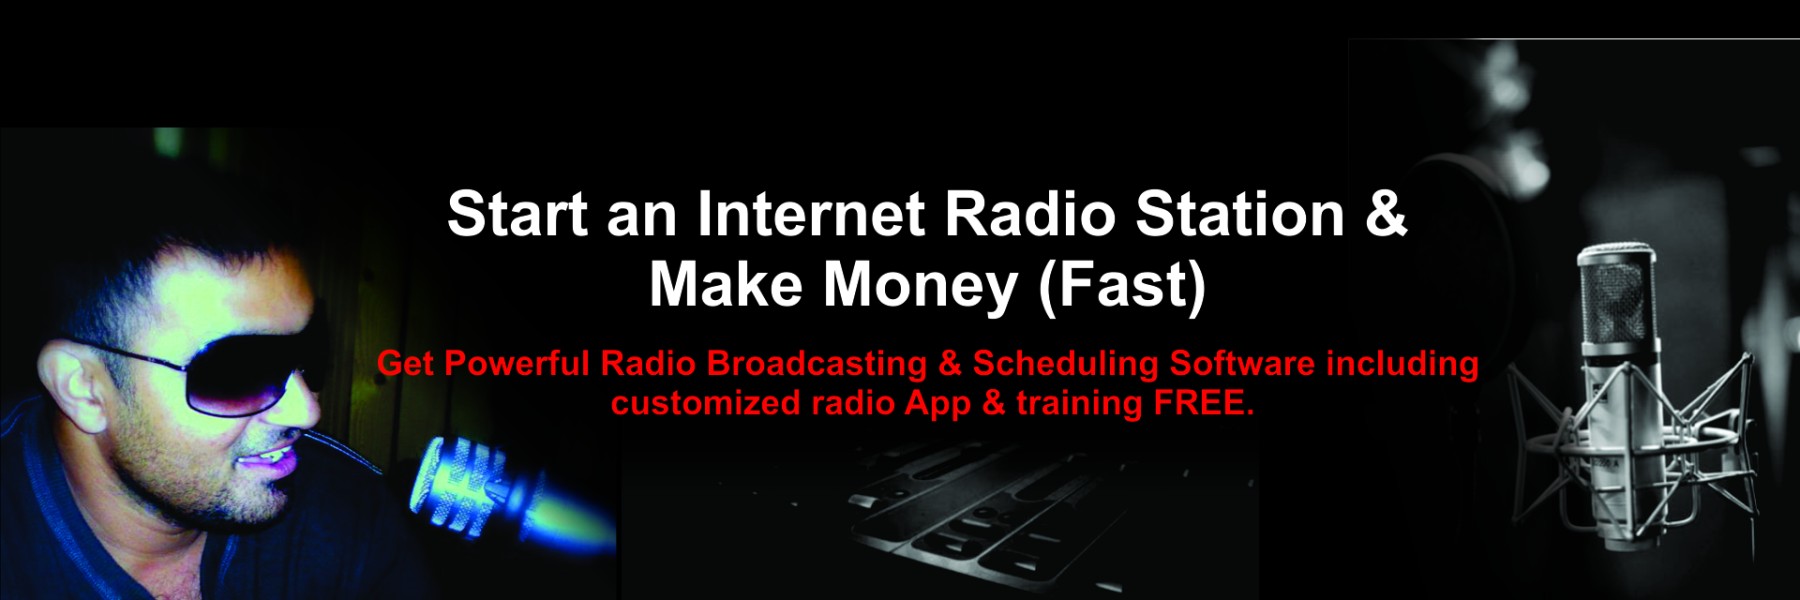 How to Start an Internet Radio Station legally from Home (Updated Guide of 2020)